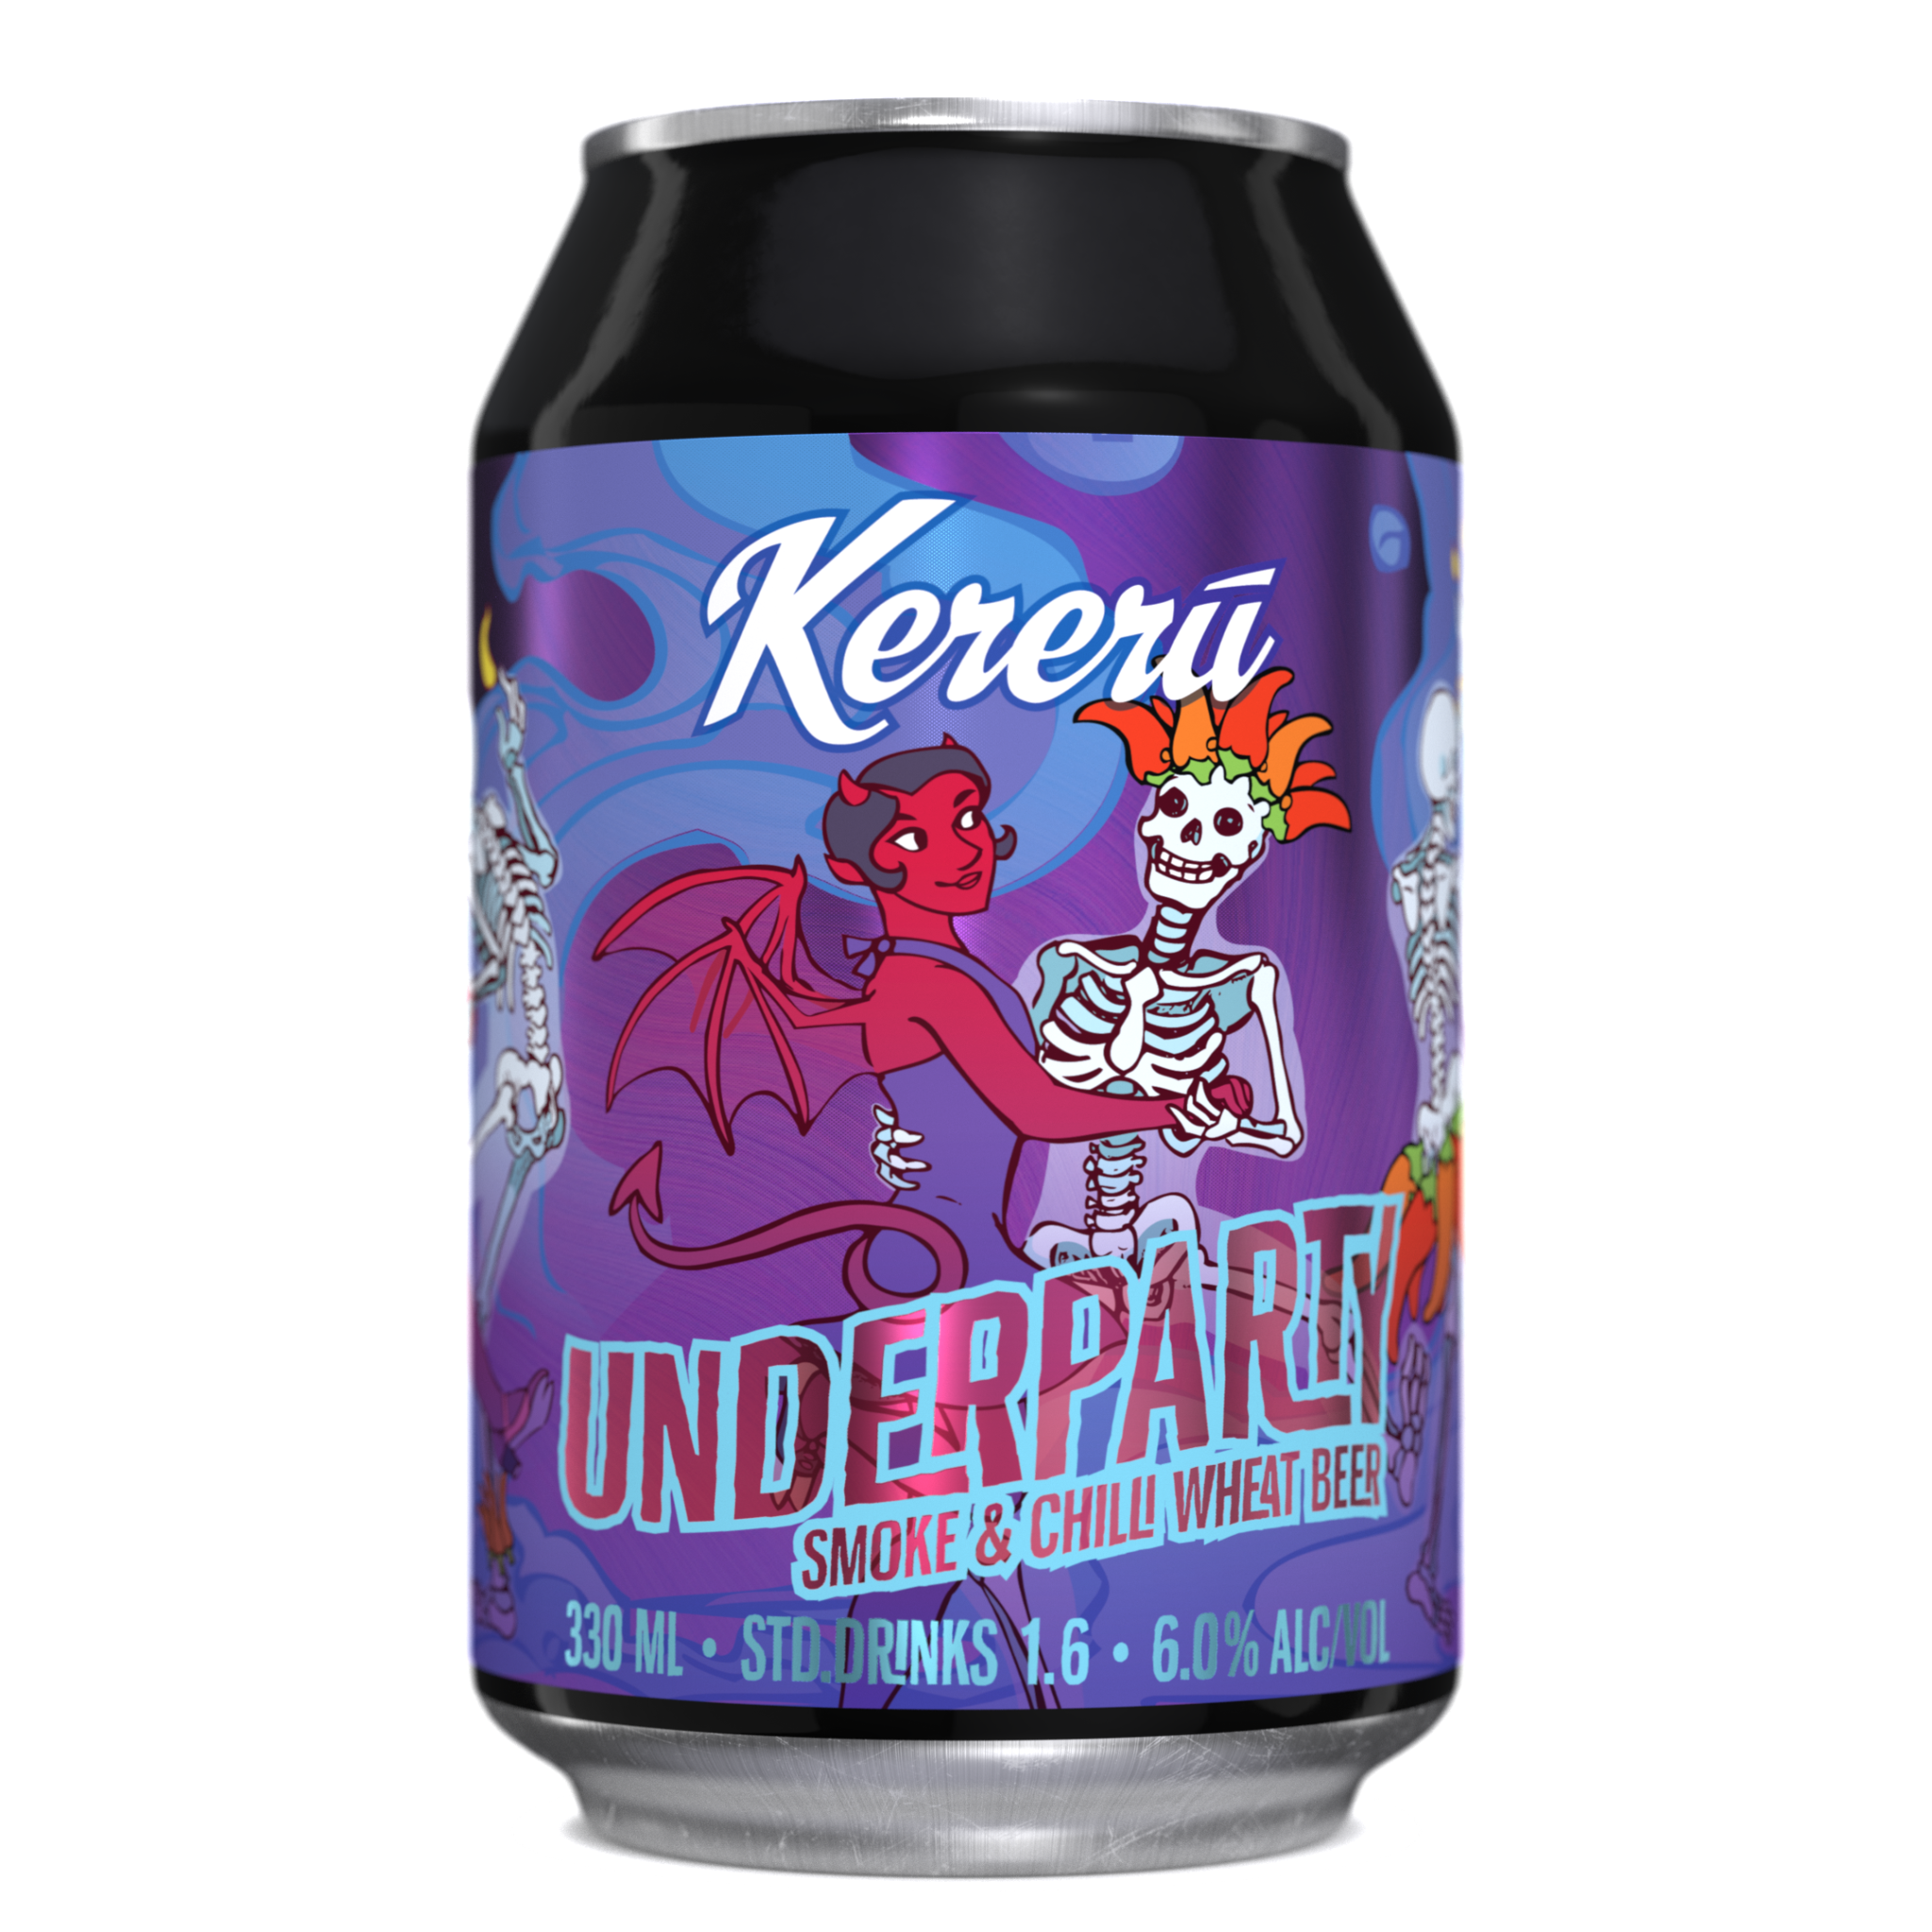 Featured Beer: Underparty